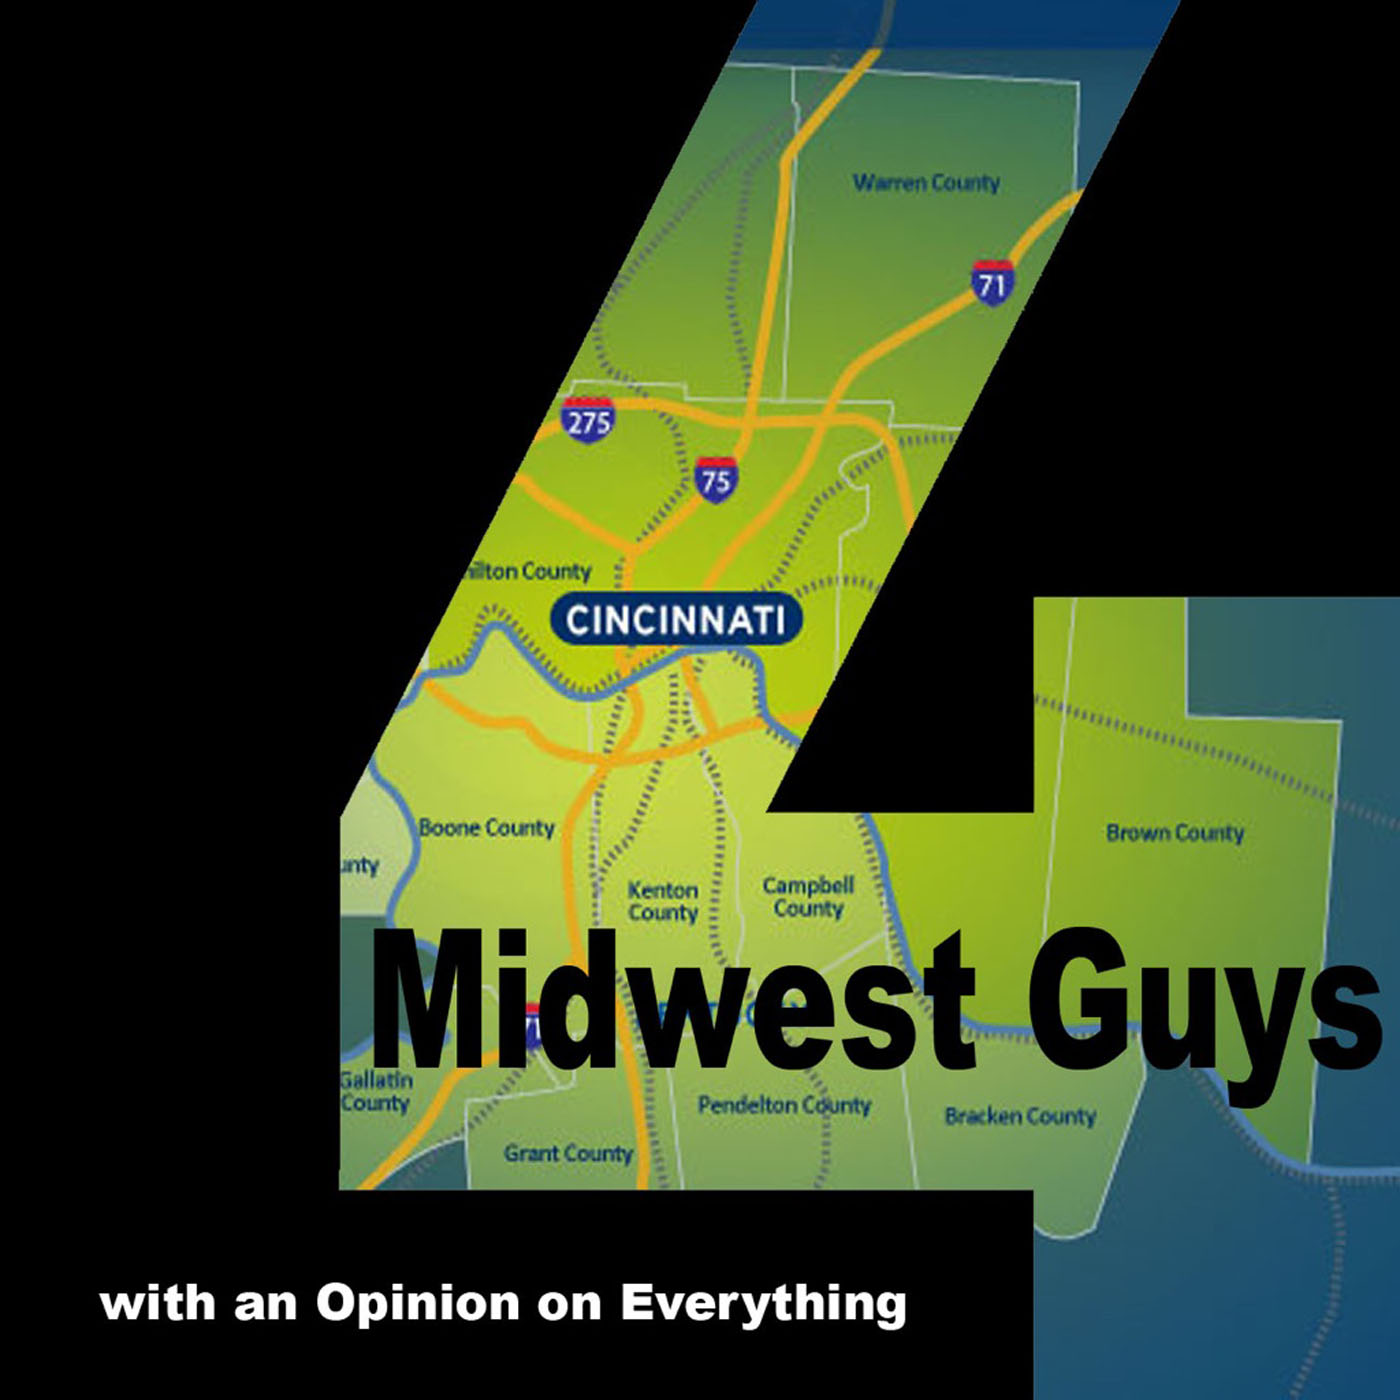 4 MIDWEST GUYS EPISODE 6